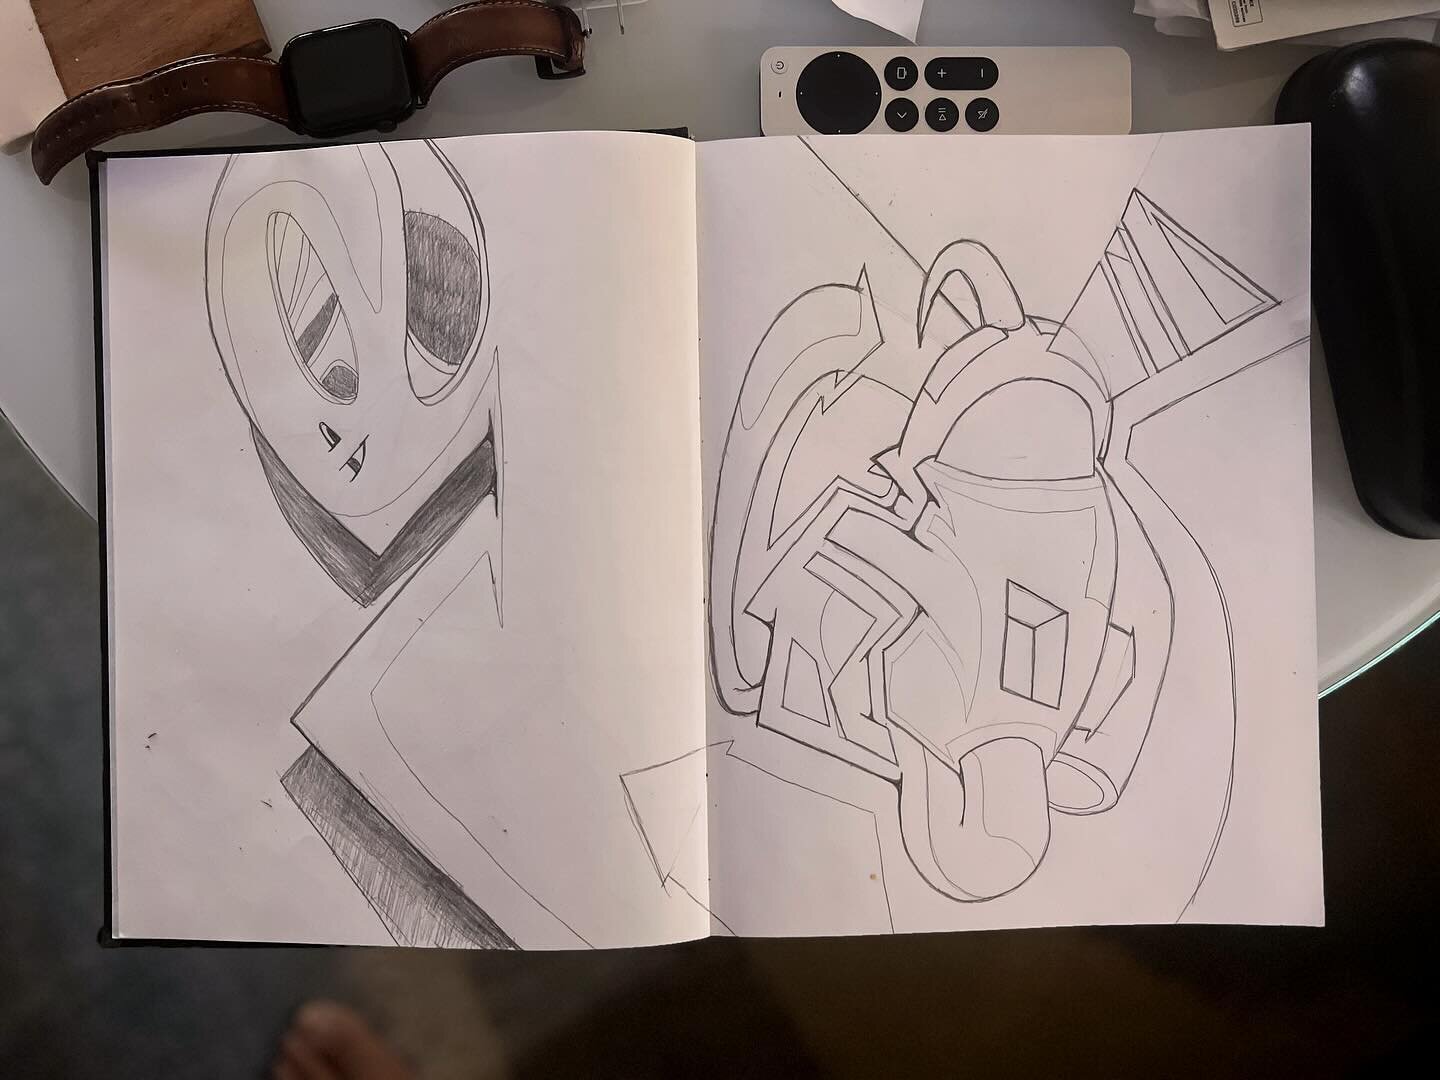 Testing some things out in the #sketchbook 
#drawing #inspiration #graffiti #architecture #abstractart #nyc 
#collector #curator